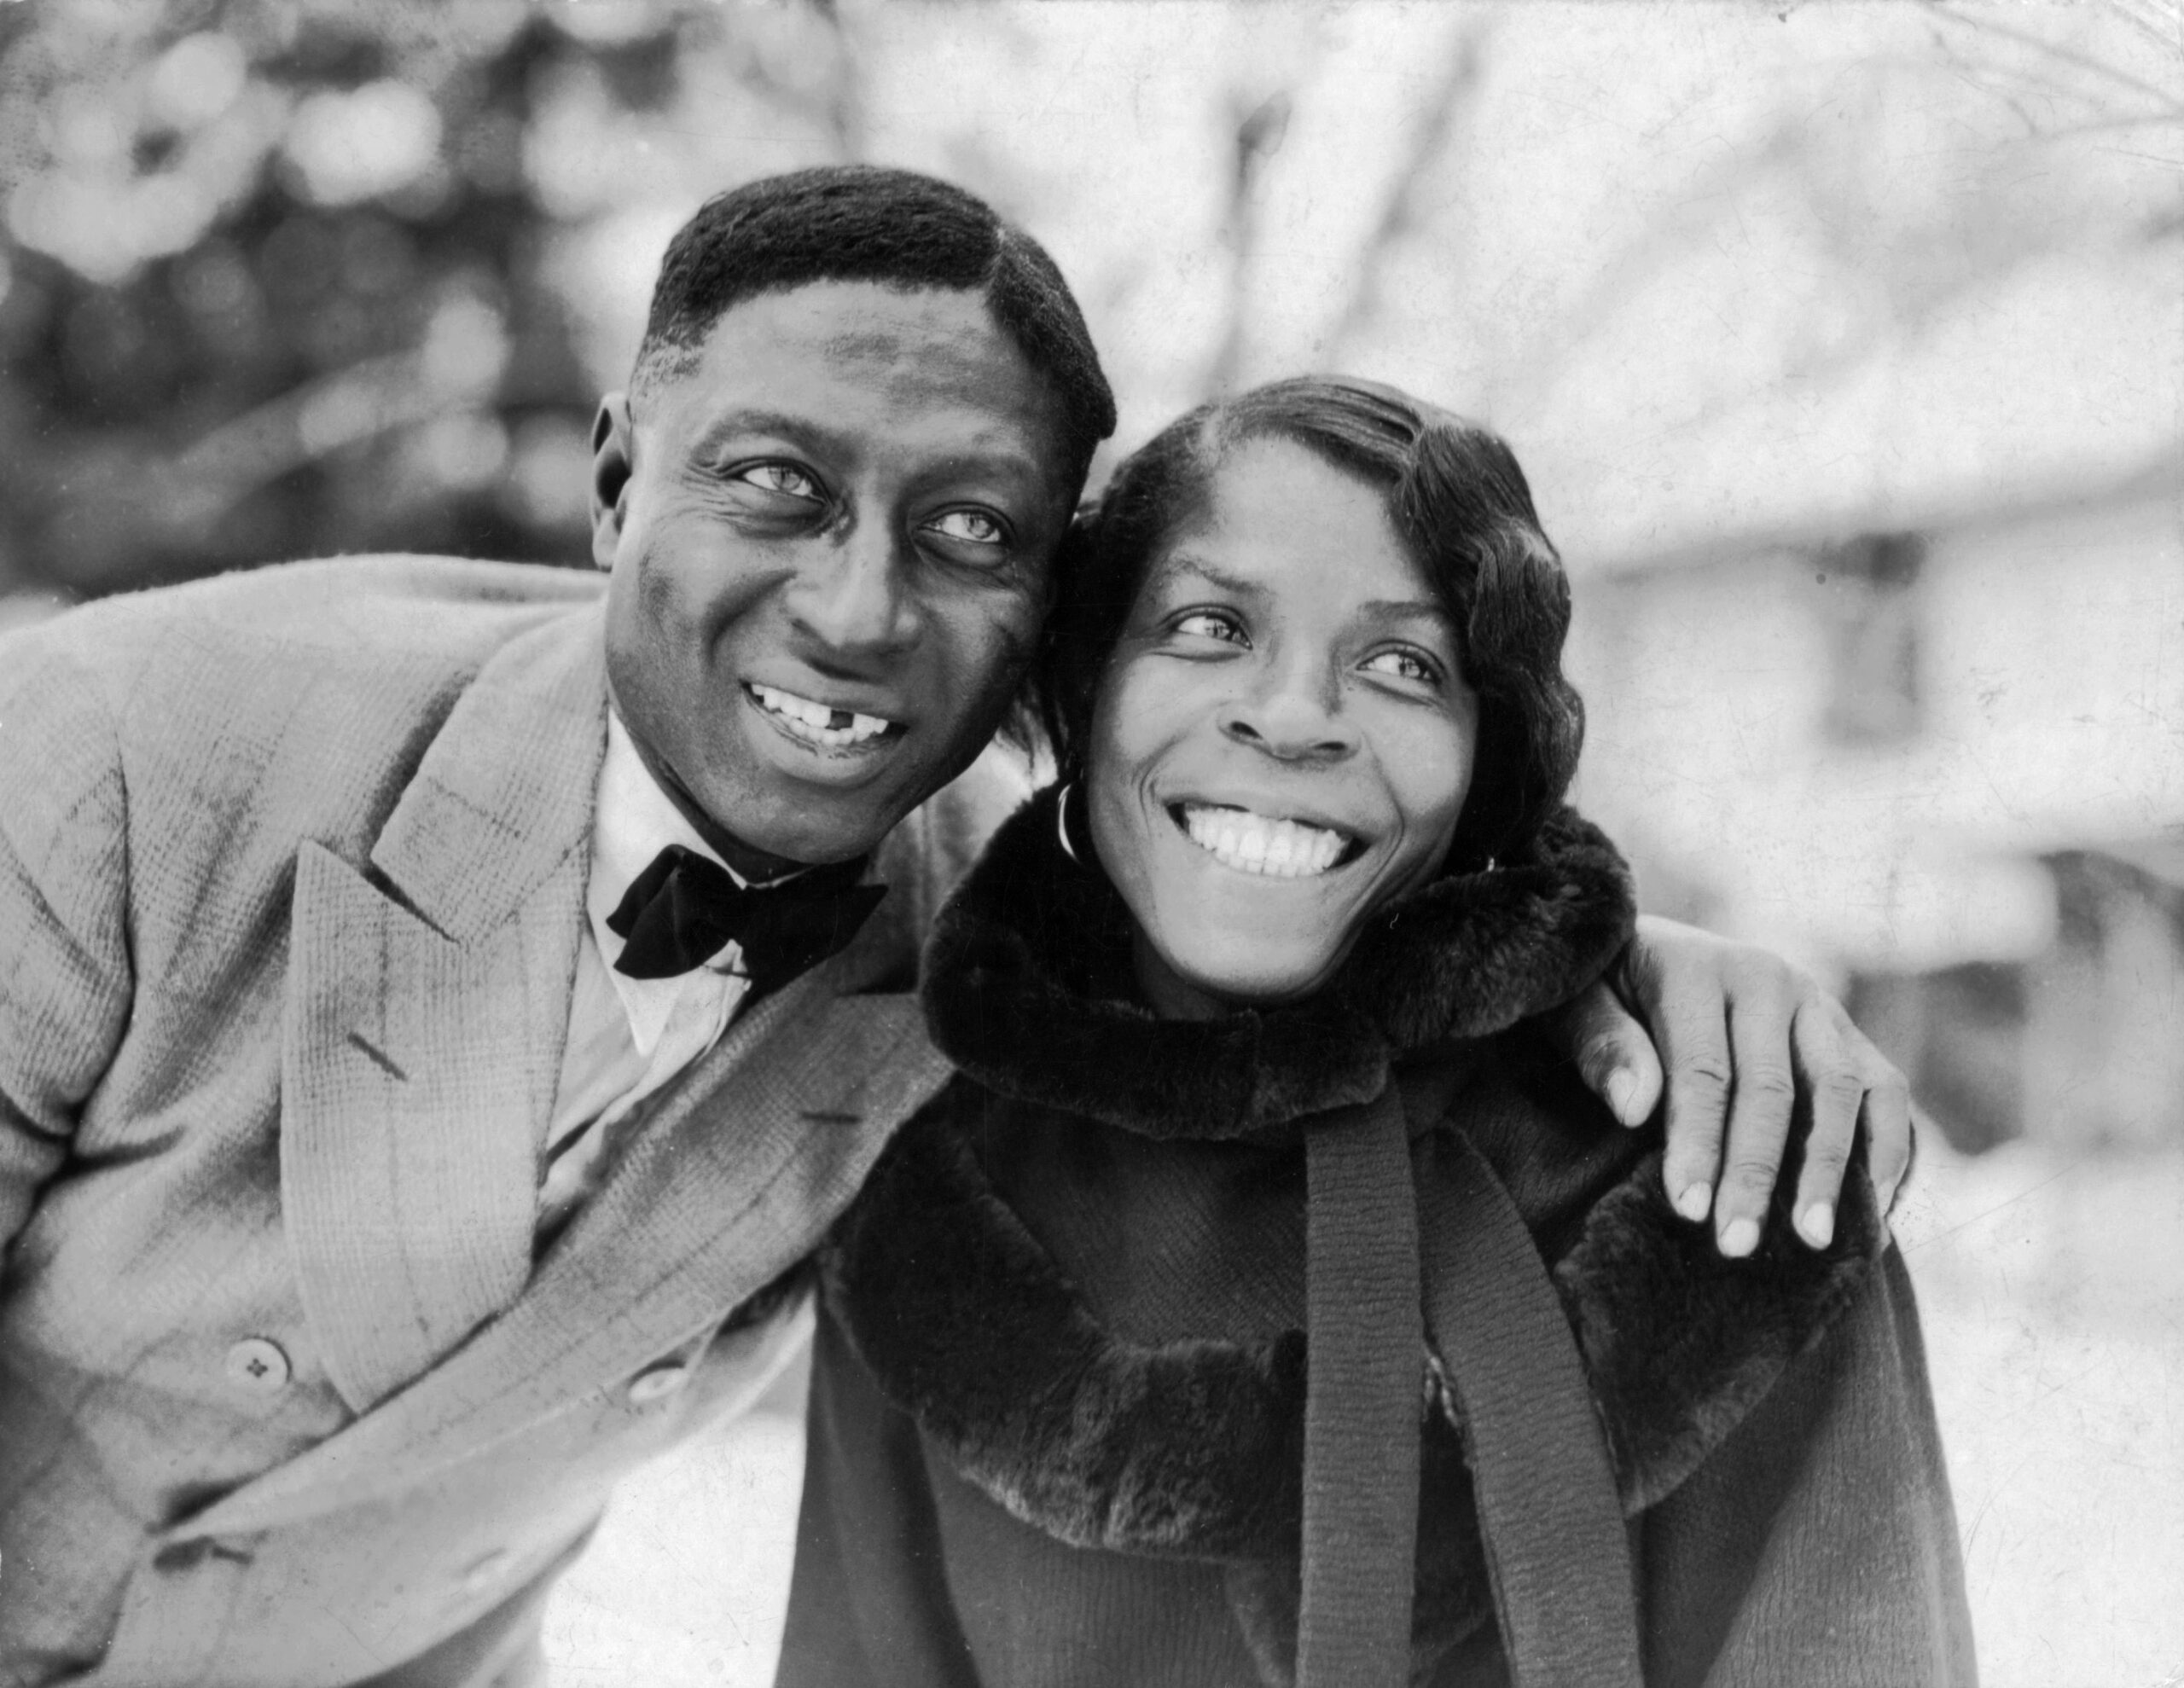 Huddie Ledbetter, better known as Lead Belly (or Leadbelly), with his wife Martha Promise Ledbetter, in Wilton, Connecticut.